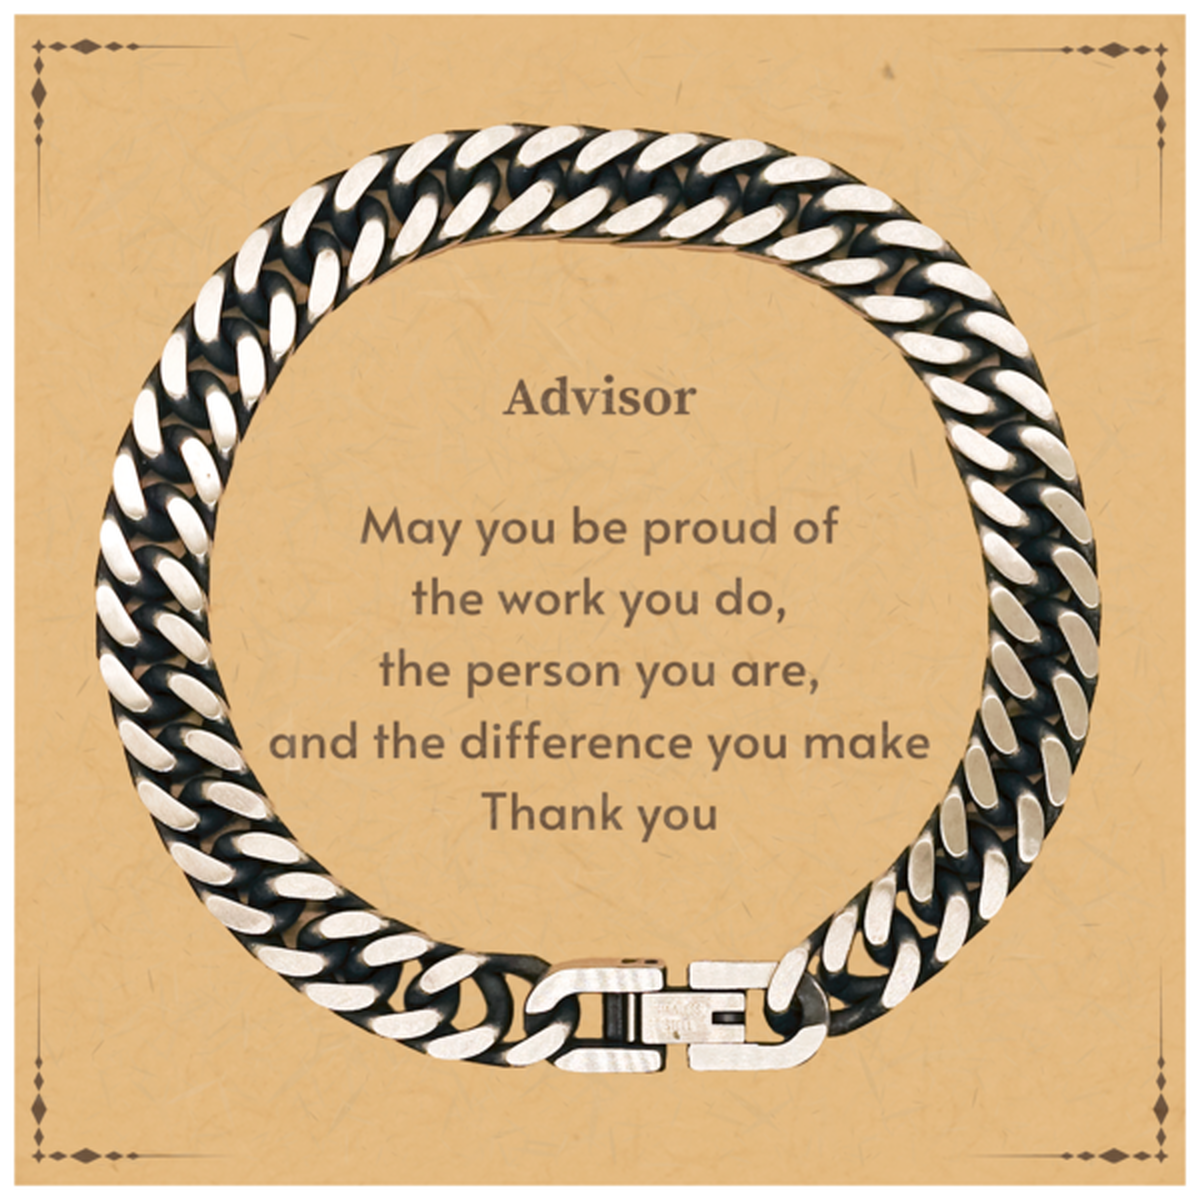 Heartwarming Cuban Link Chain Bracelet Retirement Coworkers Gifts for Advisor, Advisor May You be proud of the work you do, the person you are Gifts for Boss Men Women Friends